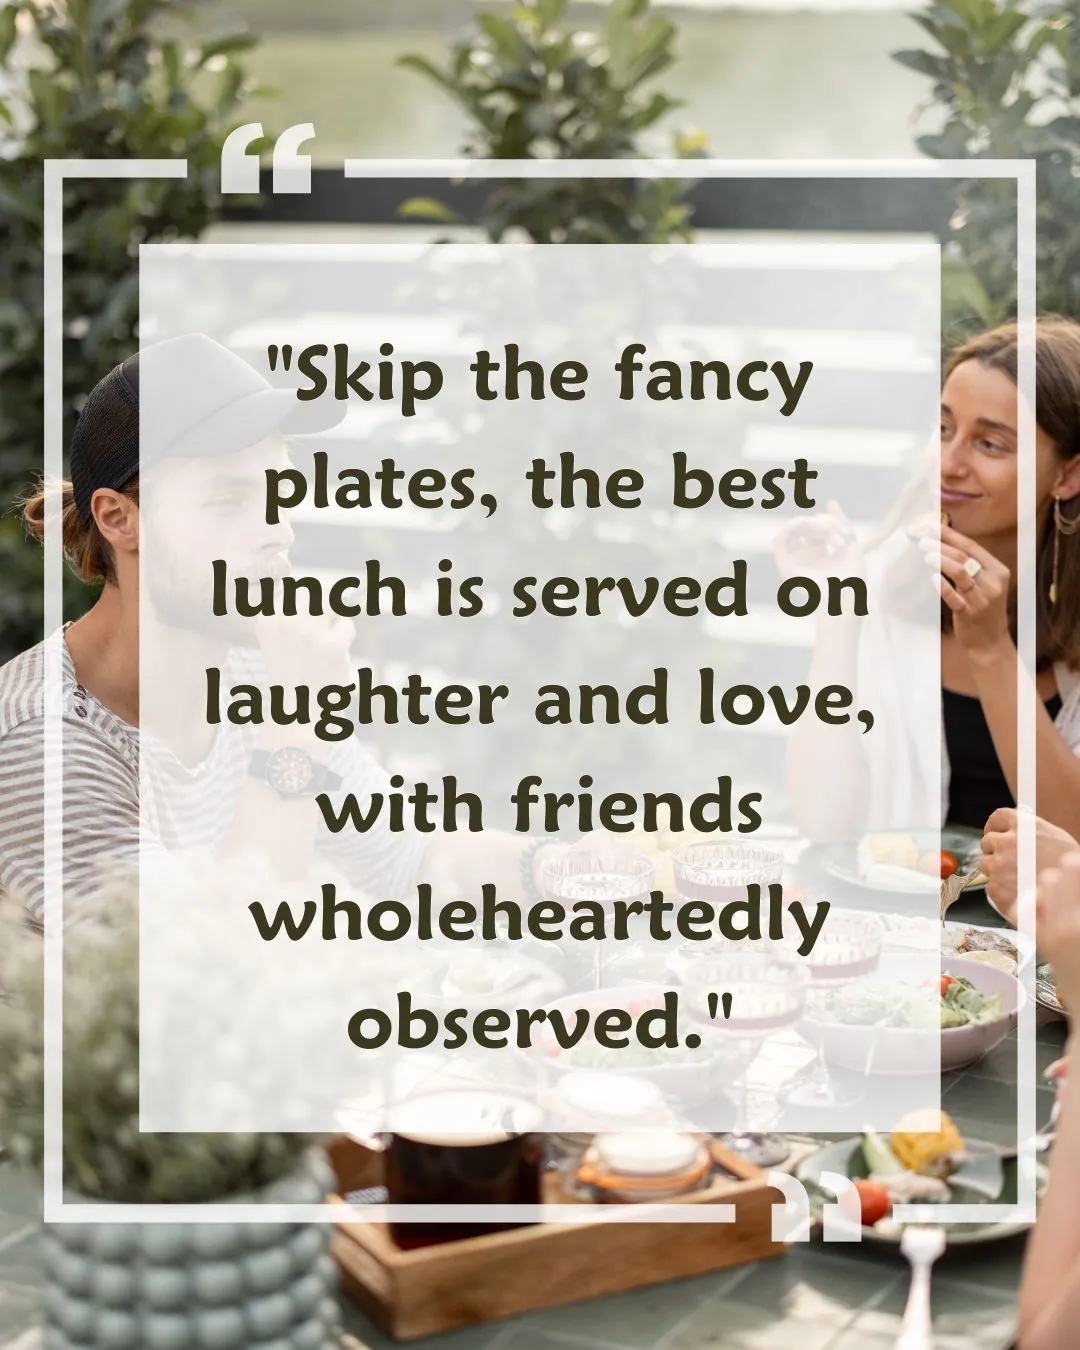 Happy Lunch with Friends quotes with Image 3